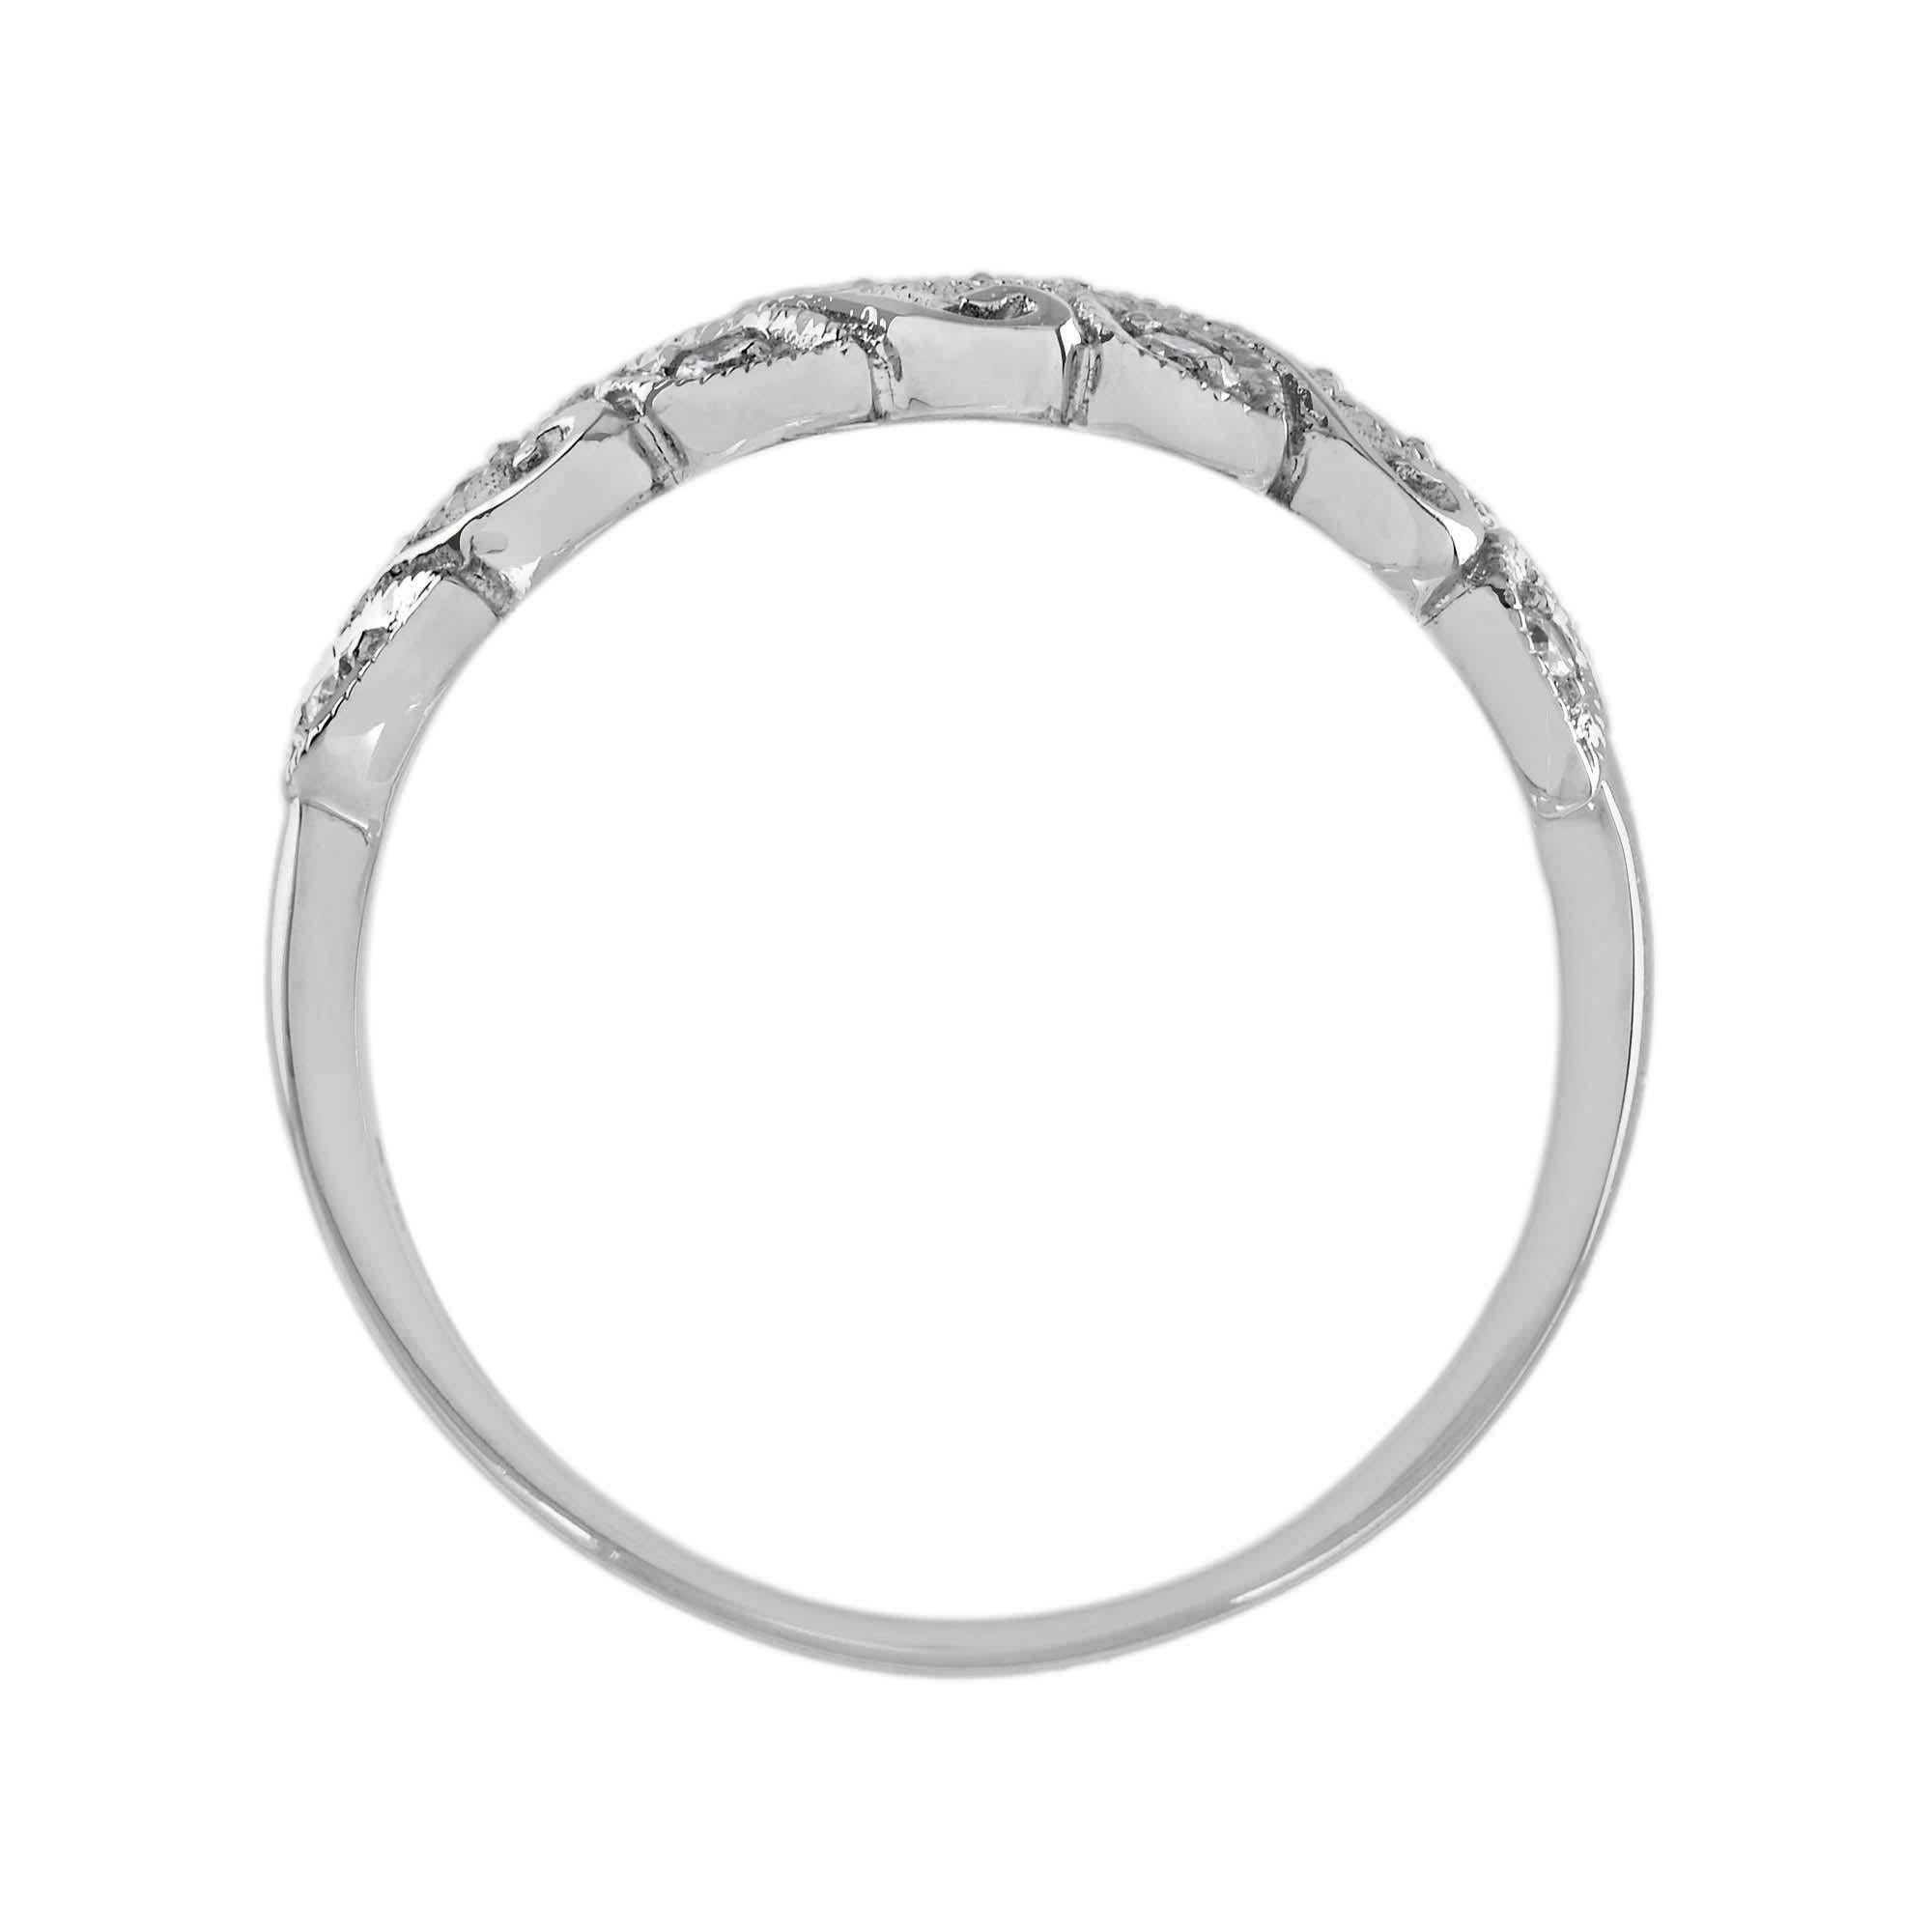 For Sale:  Diamond Floral Motif Band Ring in 9K White Gold 6